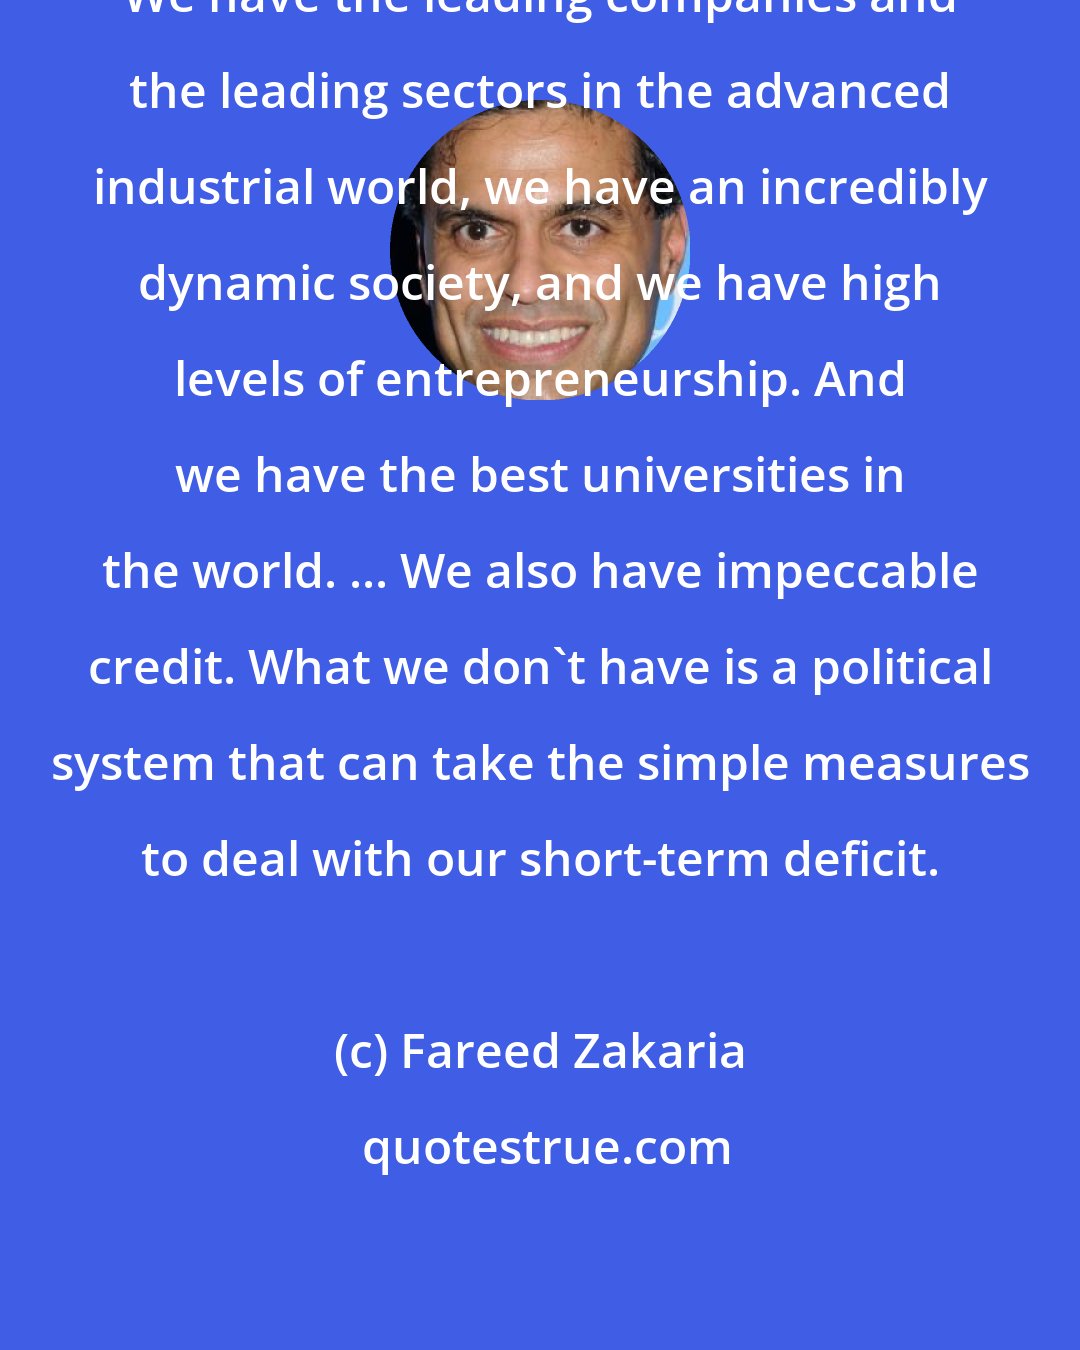 Fareed Zakaria: We have the leading companies and the leading sectors in the advanced industrial world, we have an incredibly dynamic society, and we have high levels of entrepreneurship. And we have the best universities in the world. ... We also have impeccable credit. What we don't have is a political system that can take the simple measures to deal with our short-term deficit.